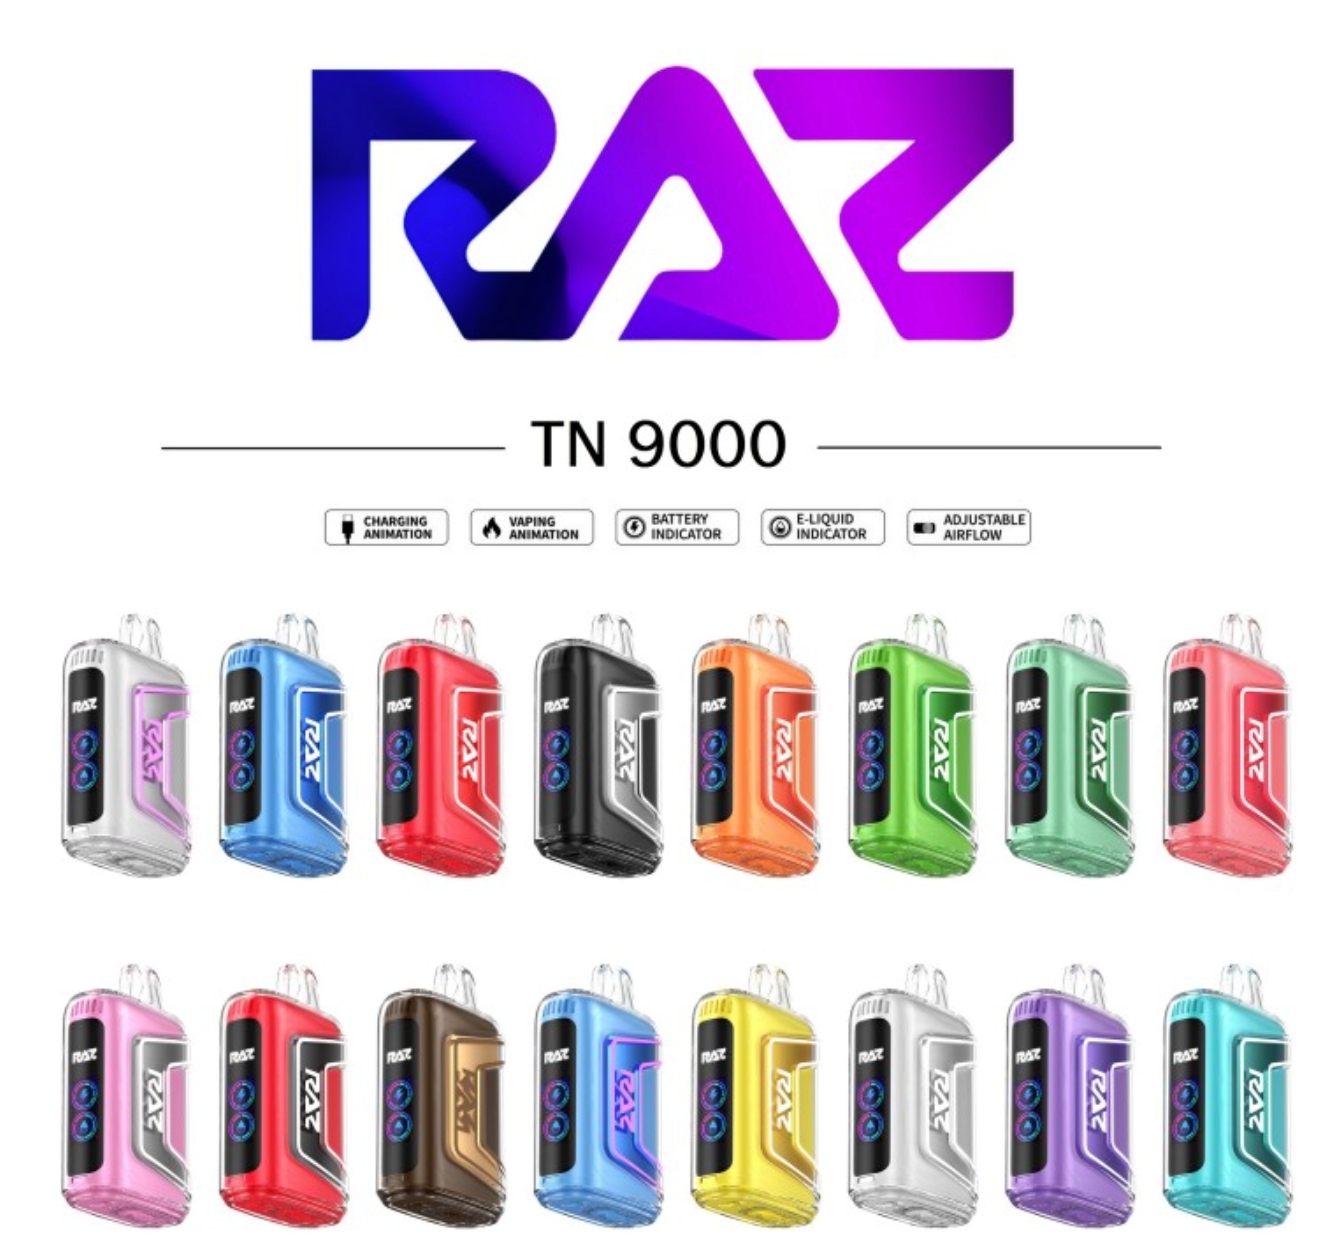 Style & Technology: TN9000 Rechargeable Vape Experience